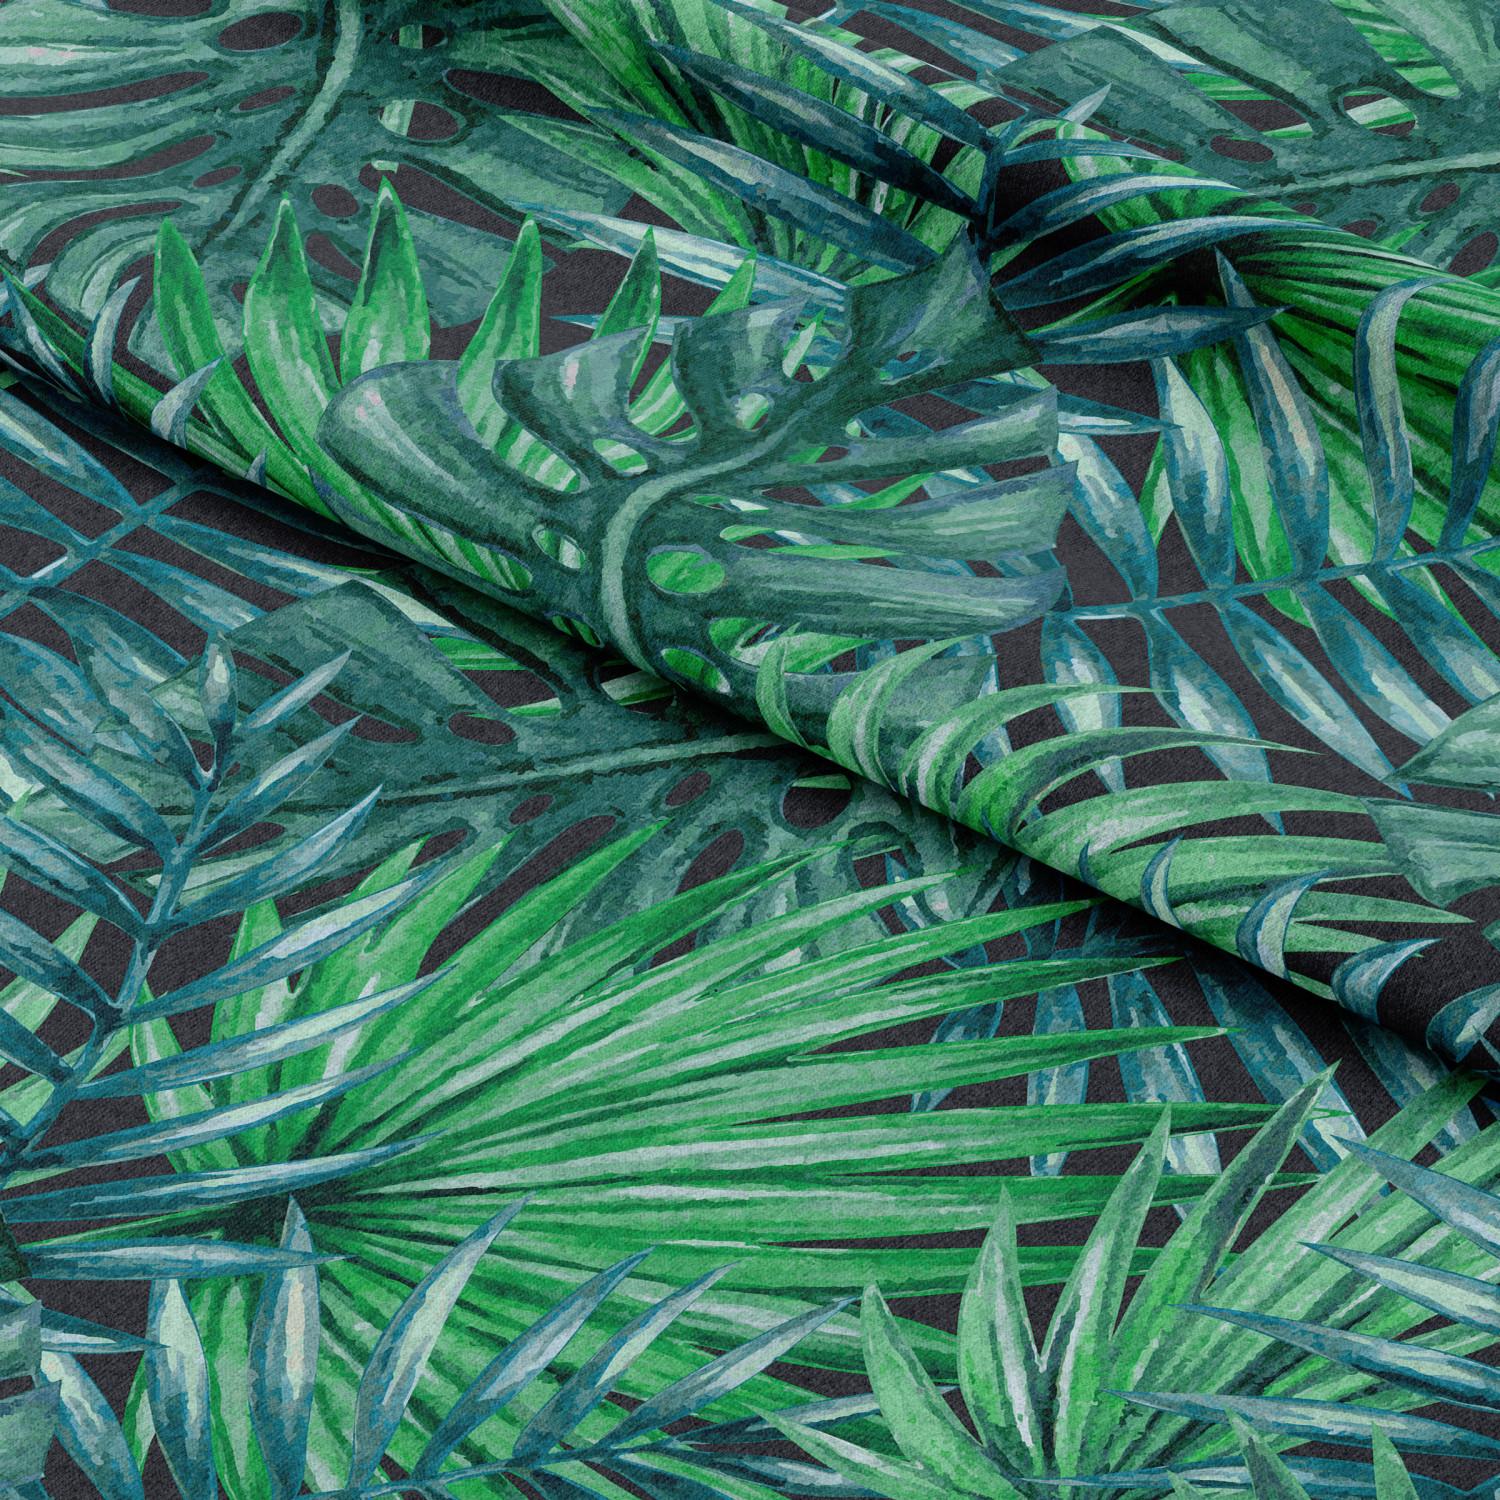 Decorative Curtain Palms and leaves - botanical composition, monstera in shades of green